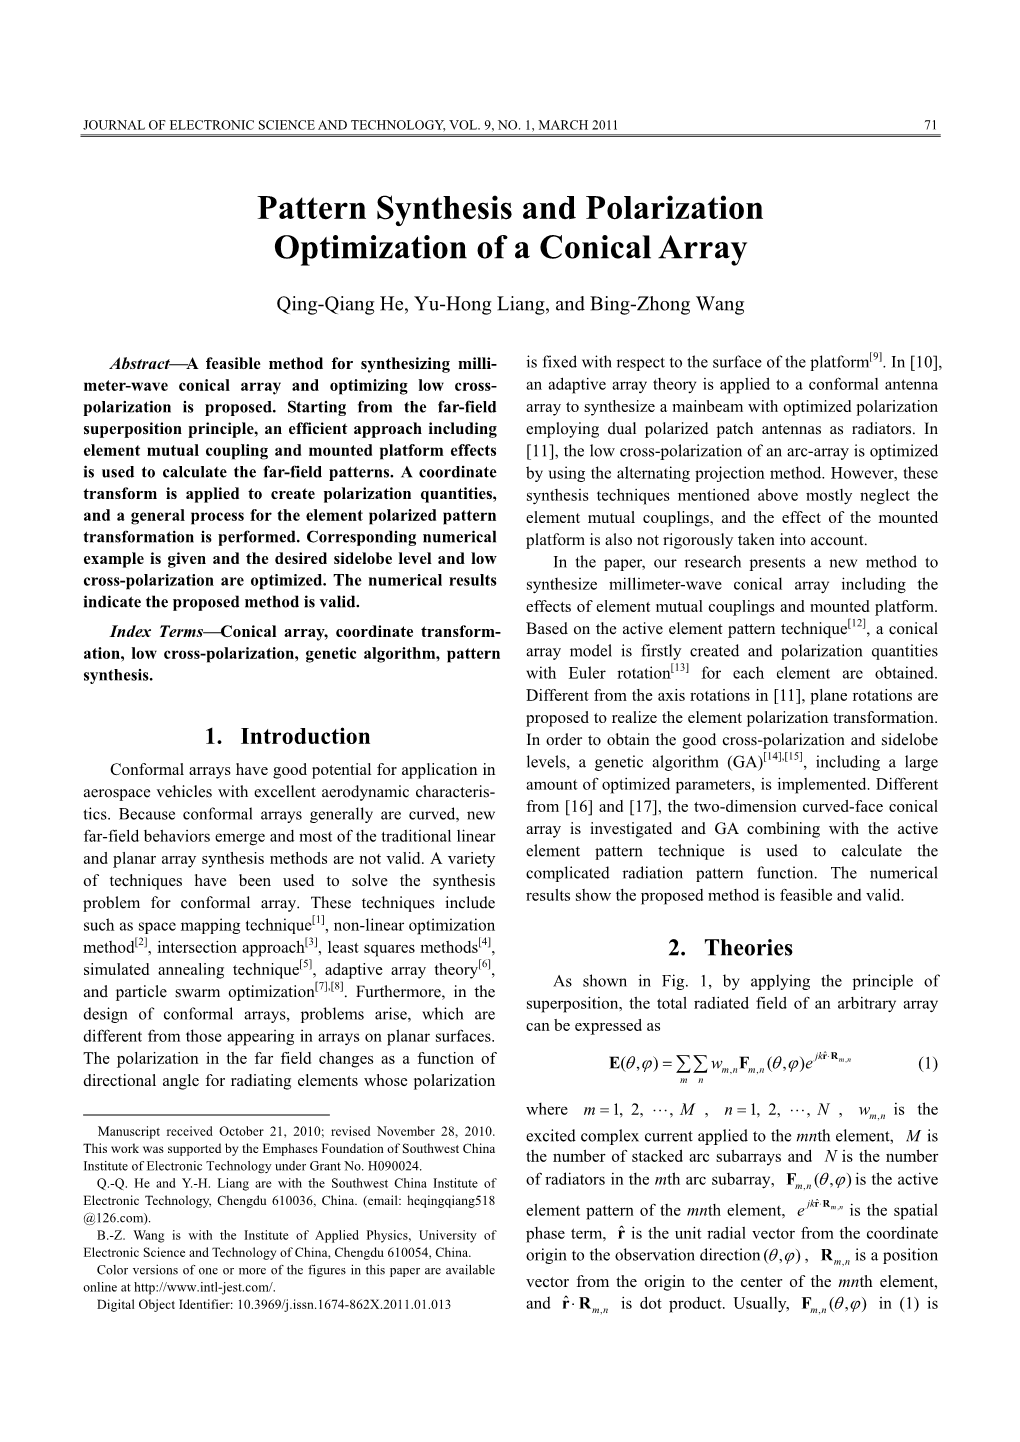 Pattern Synthesis and Polarization Optimization of a Conical Array